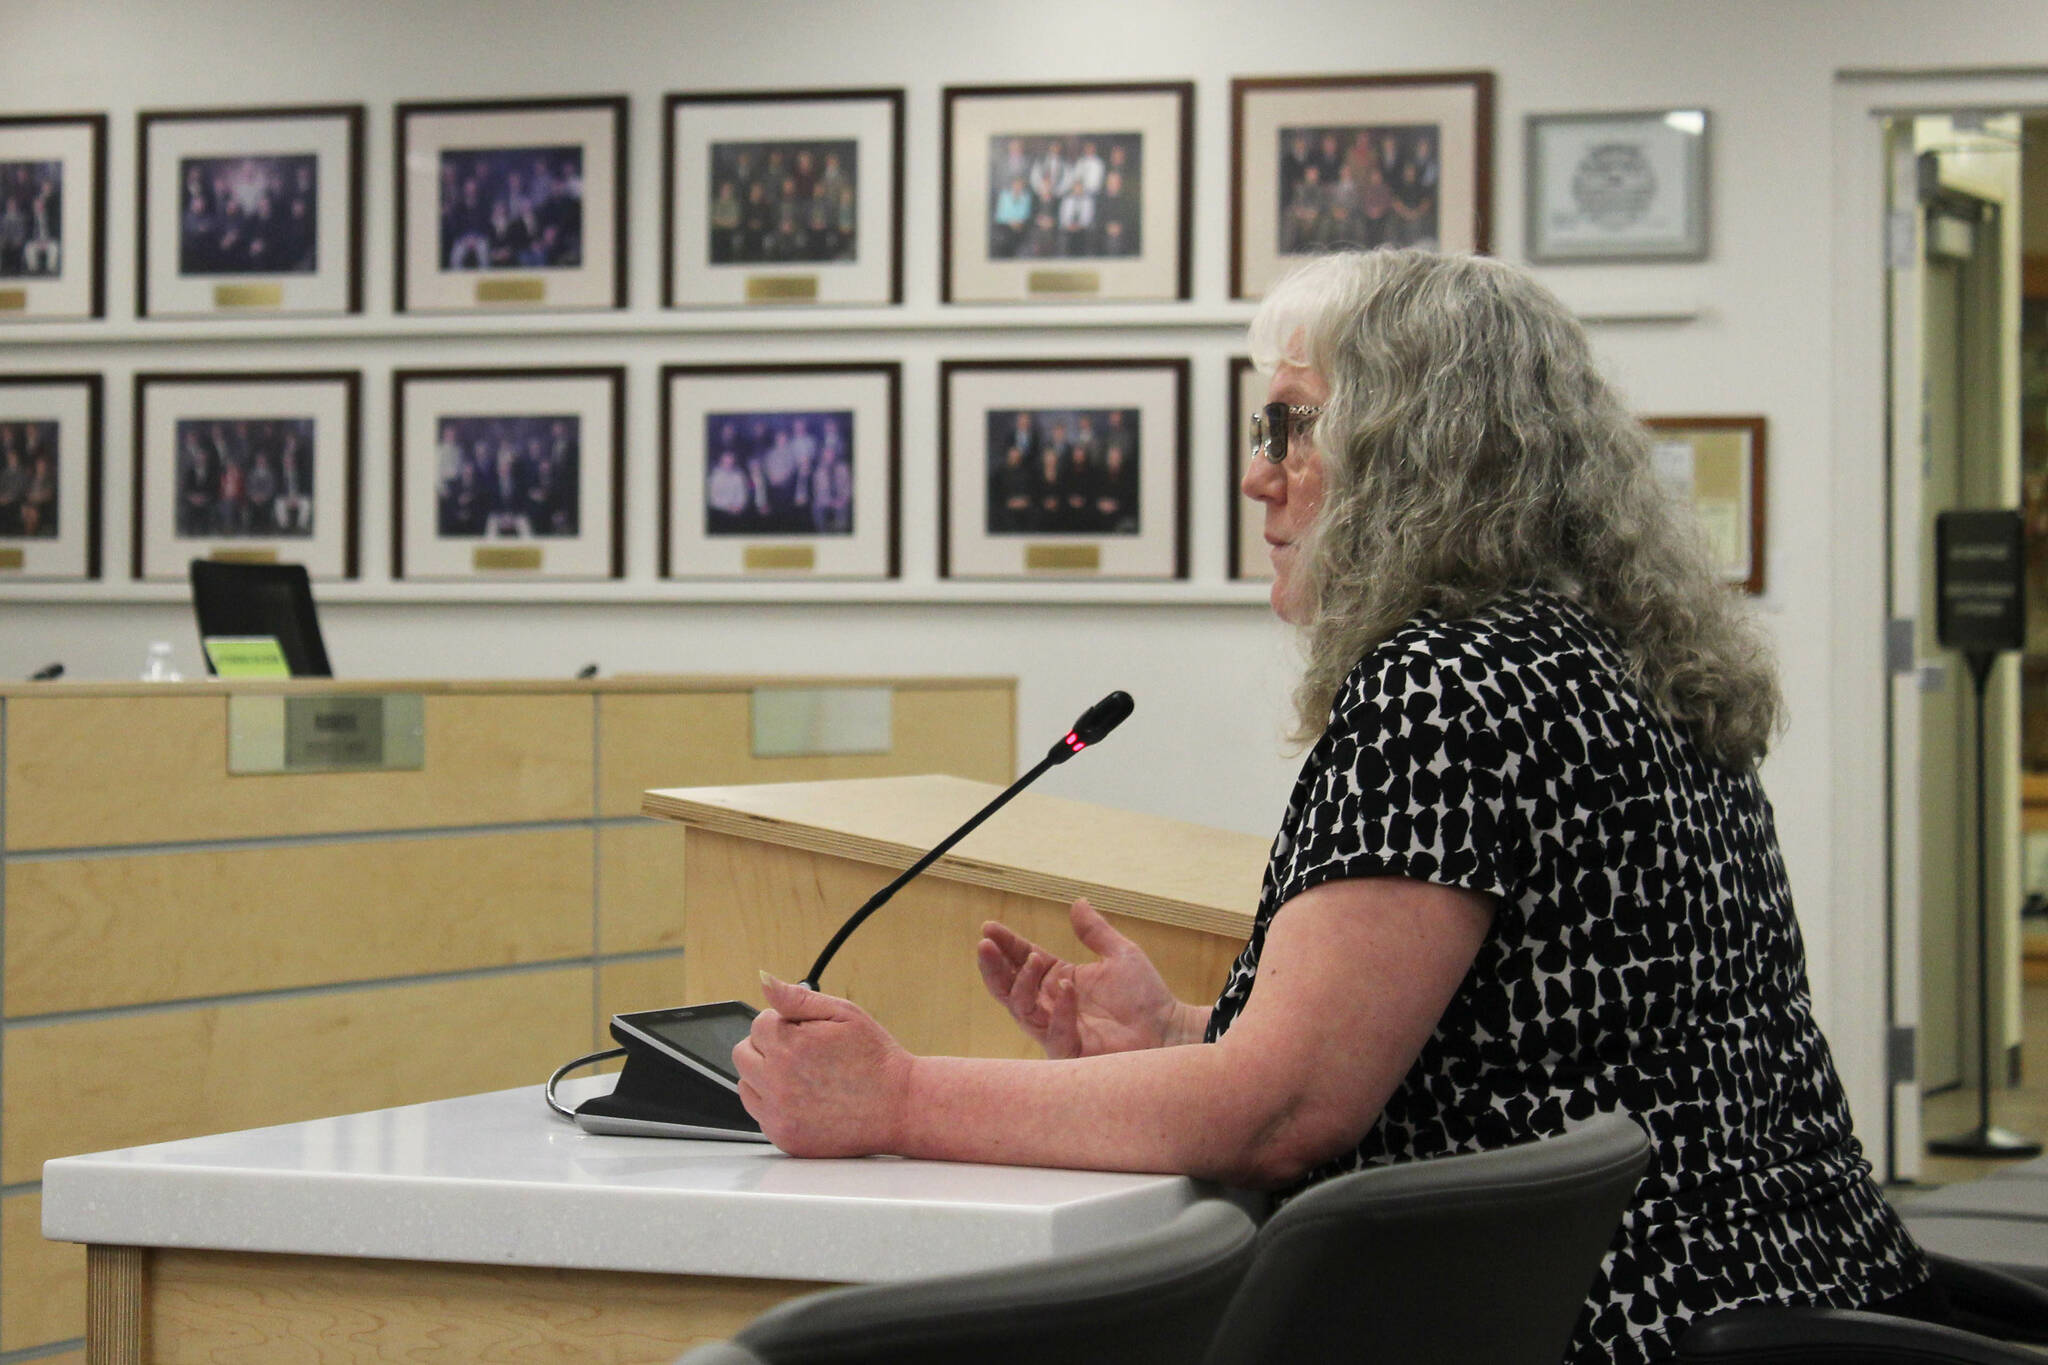 Kenai Peninsula Borough School District Board of Education President Debbie Cary testifies before the Kenai Peninsula Borough Assembly about a resolution that would support the separation of transgender and cisgender student athetes on Tuesday, July 11, 2023 in Soldotna, Alaska. (Ashlyn O’Hara/Peninsula Clarion)